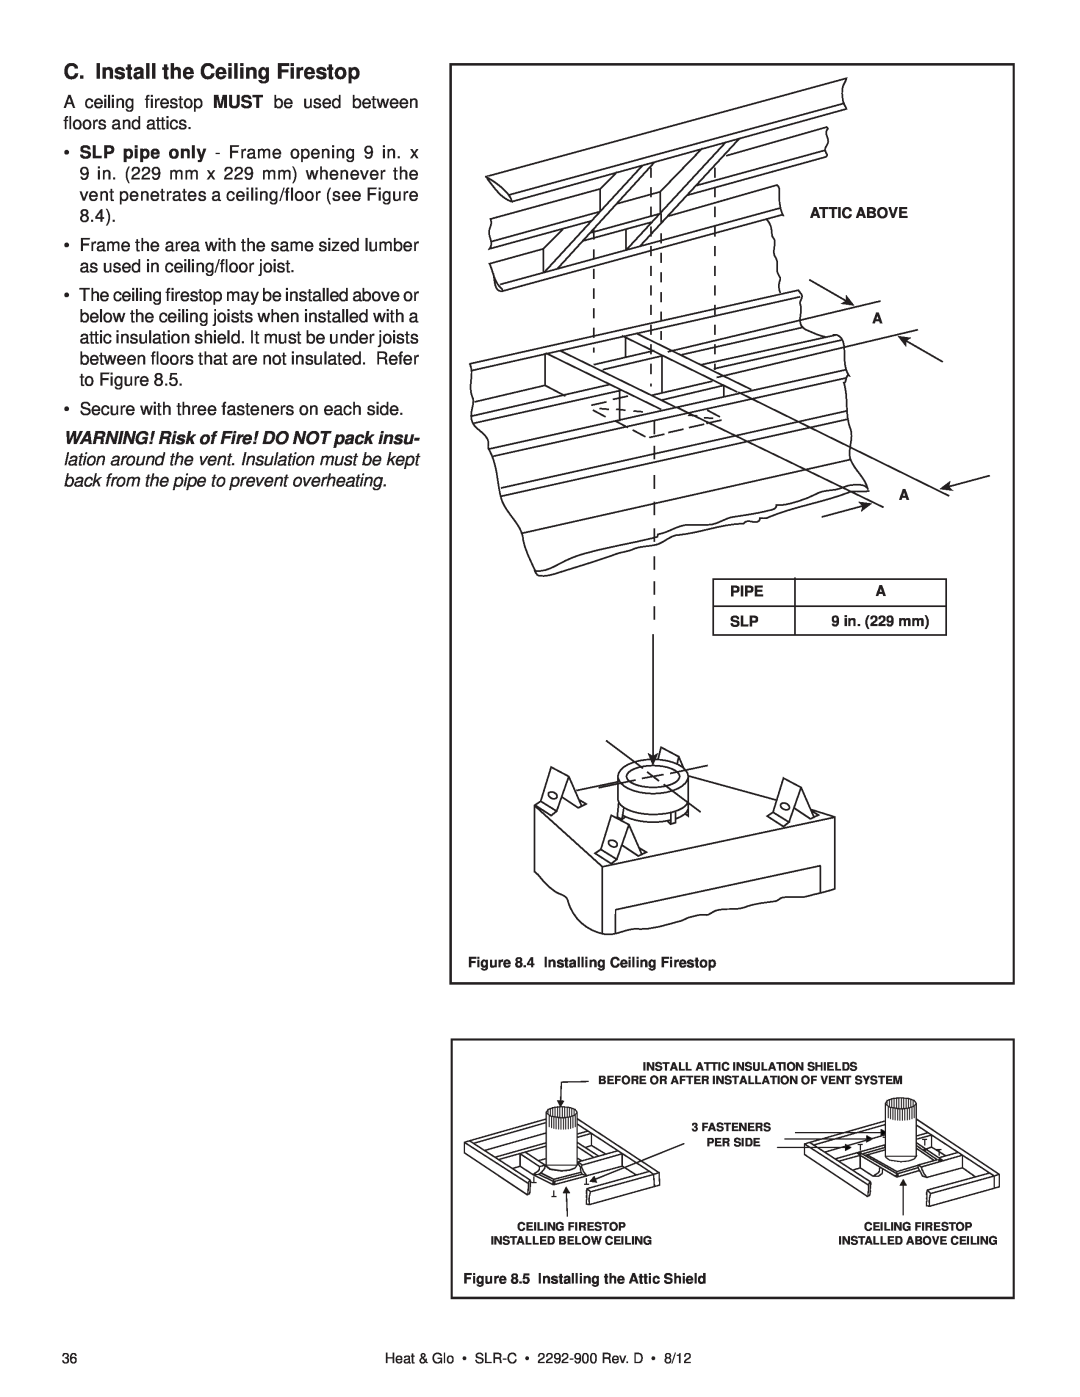 Heat & Glo LifeStyle SLR-C (COSMO) owner manual C. Install the Ceiling Firestop 